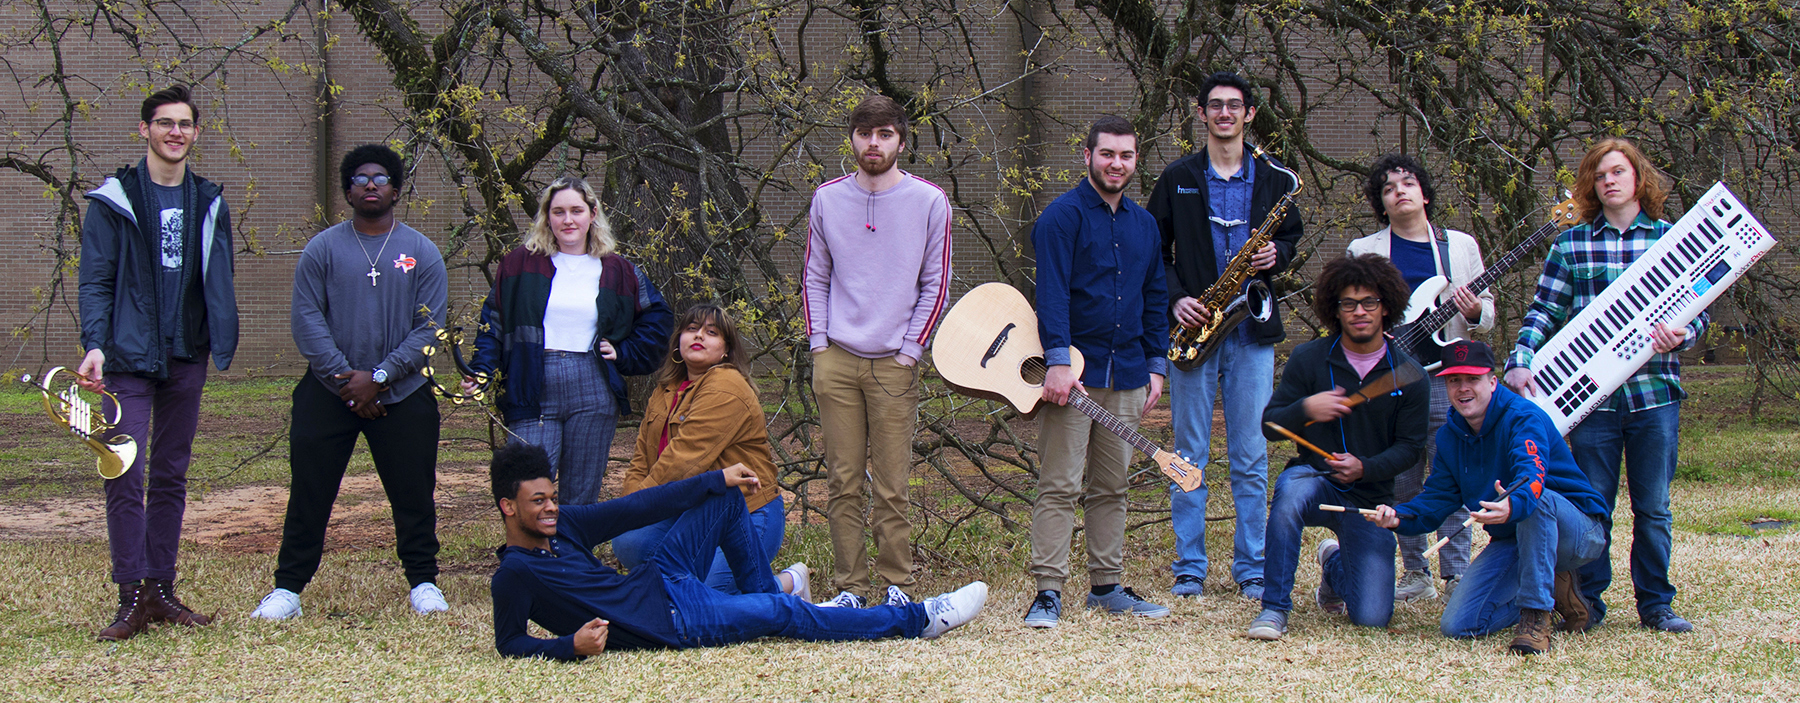 The SRT Contemporary Ensemble will perform at 7:30 p.m. Wednesday, April 10, in Cole Concert Hall on the SFA campus. The rhythm and blues concert will feature the music of Ray Charles, Anderson.Paak, The Fugees, James Brown and others.